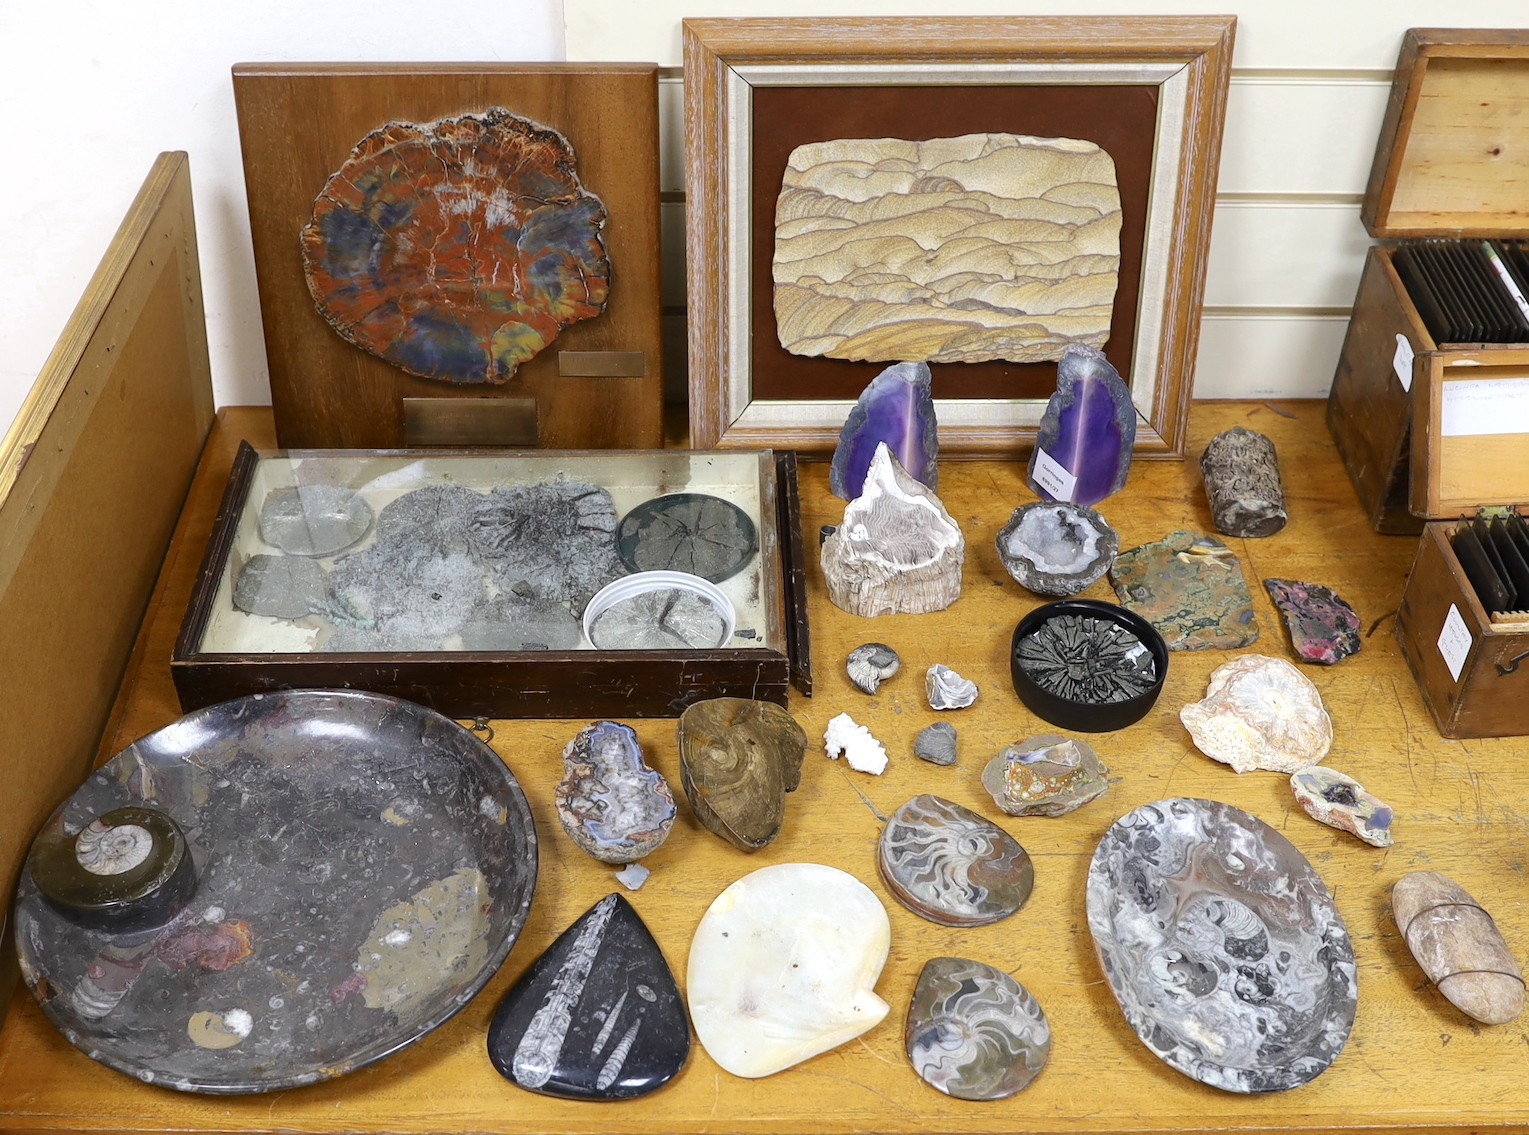 An interesting collection of fossils, polished marble, petrified wood etc.